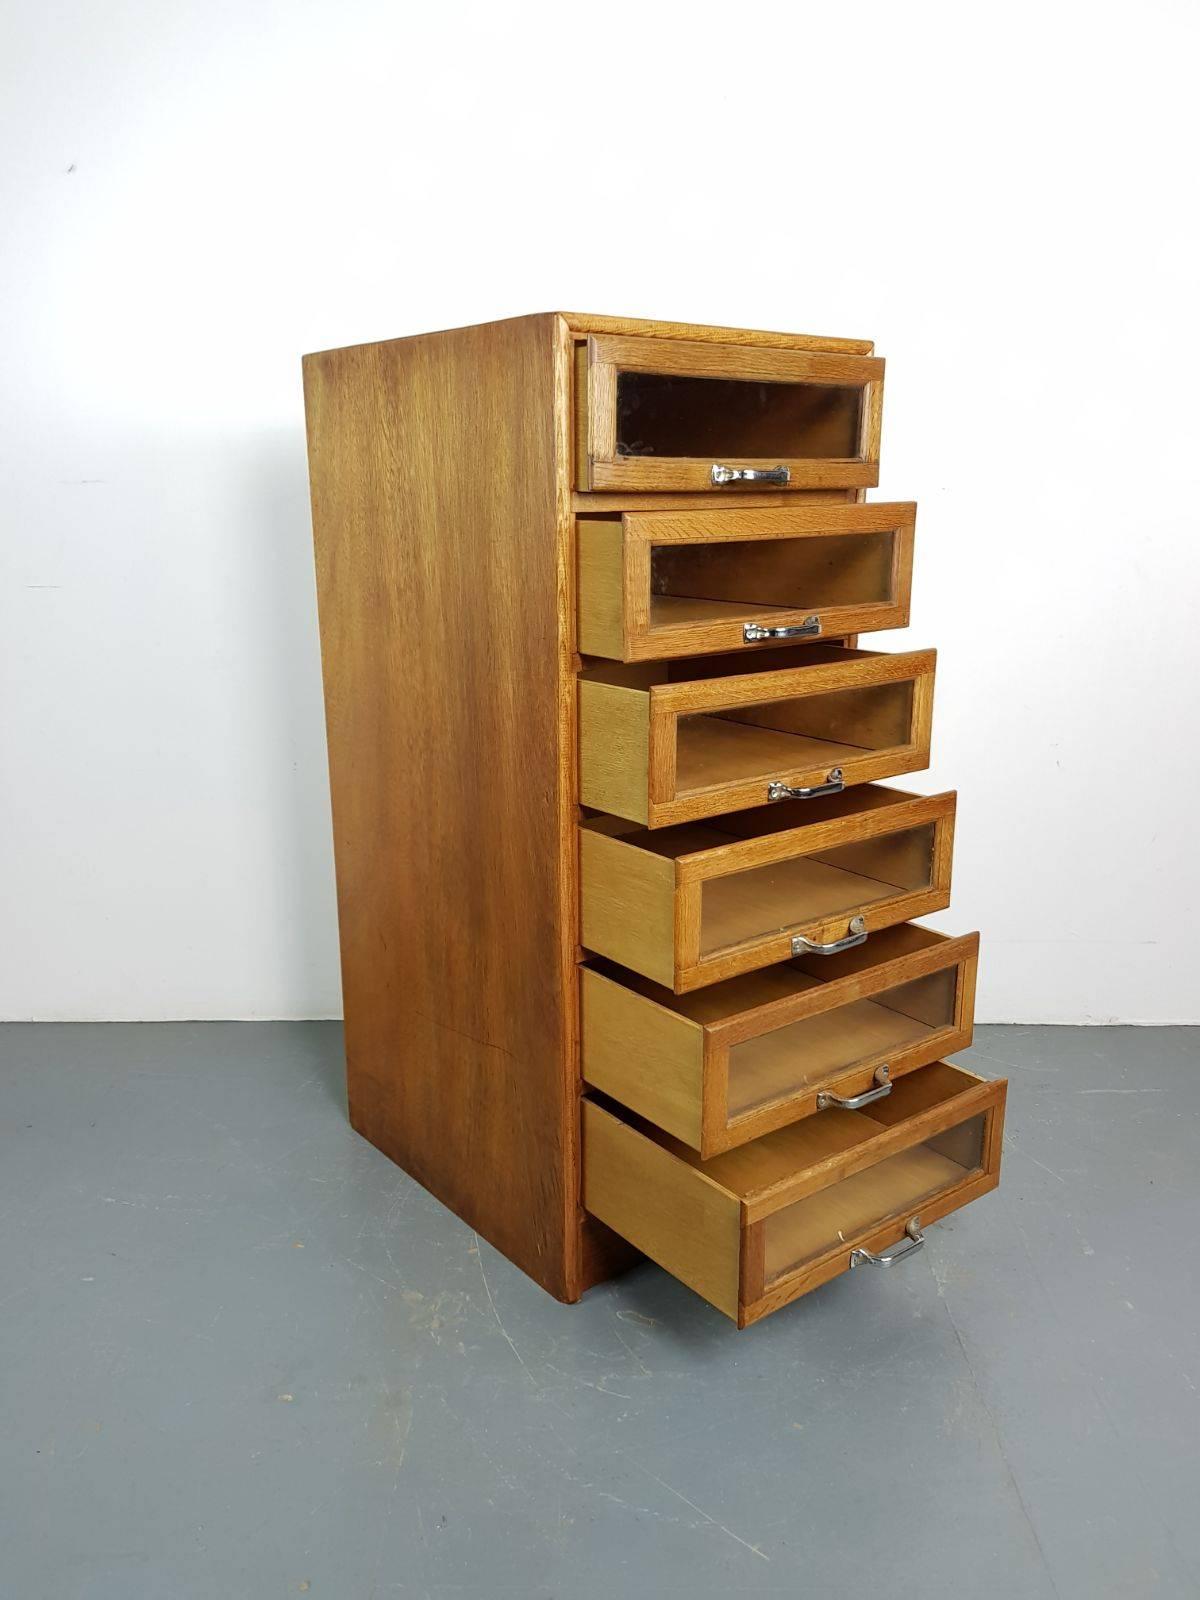 Six-drawer single column haberdashery shop cabinet. 

It has six glass fronted drawers, all with metal D handles.

Approximate dimensions:

Height: 110cm

Width: 47cm

Depth: 58cm

Drawers: 40cm x 44.5cm x 12.5cm.

Overall, in good